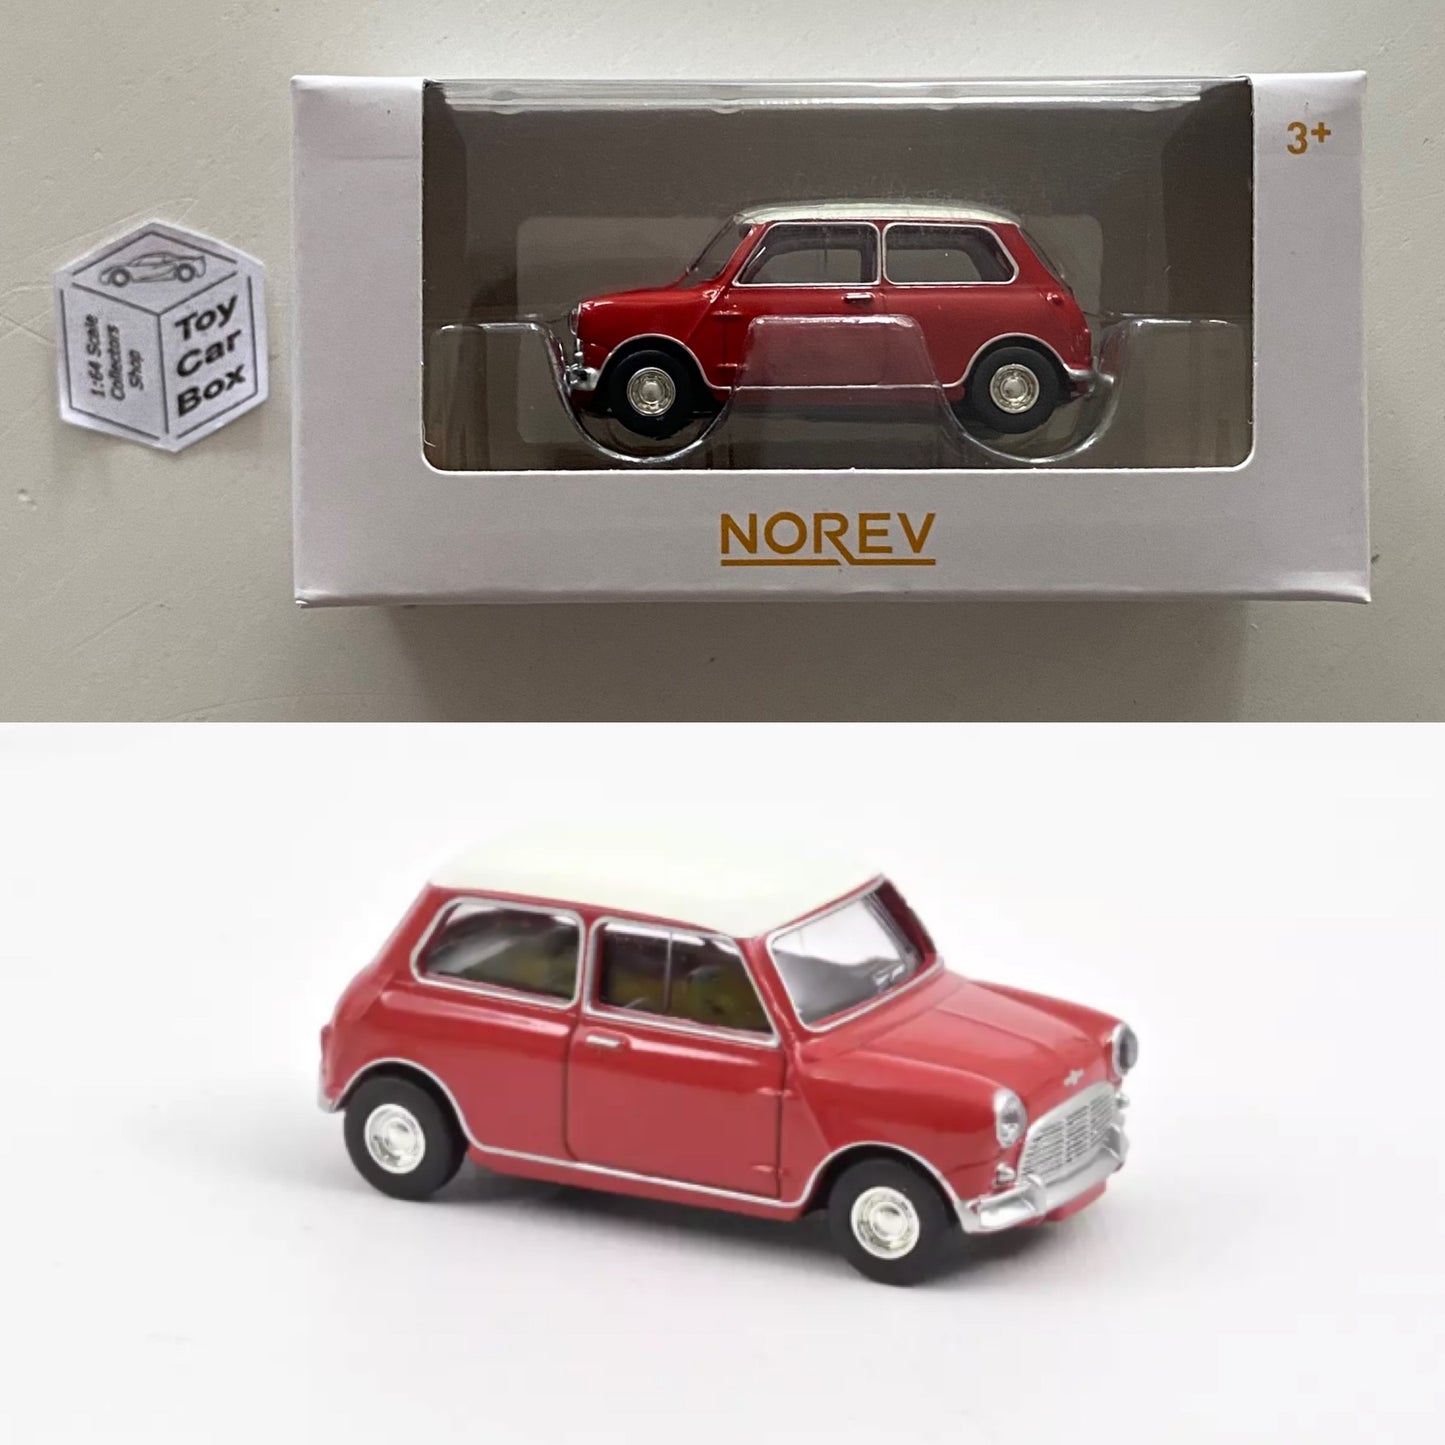 NOREV 1:64 Scale* - 1964 Mini Cooper S (Tartan Red & White Roof - Boxed) F22g